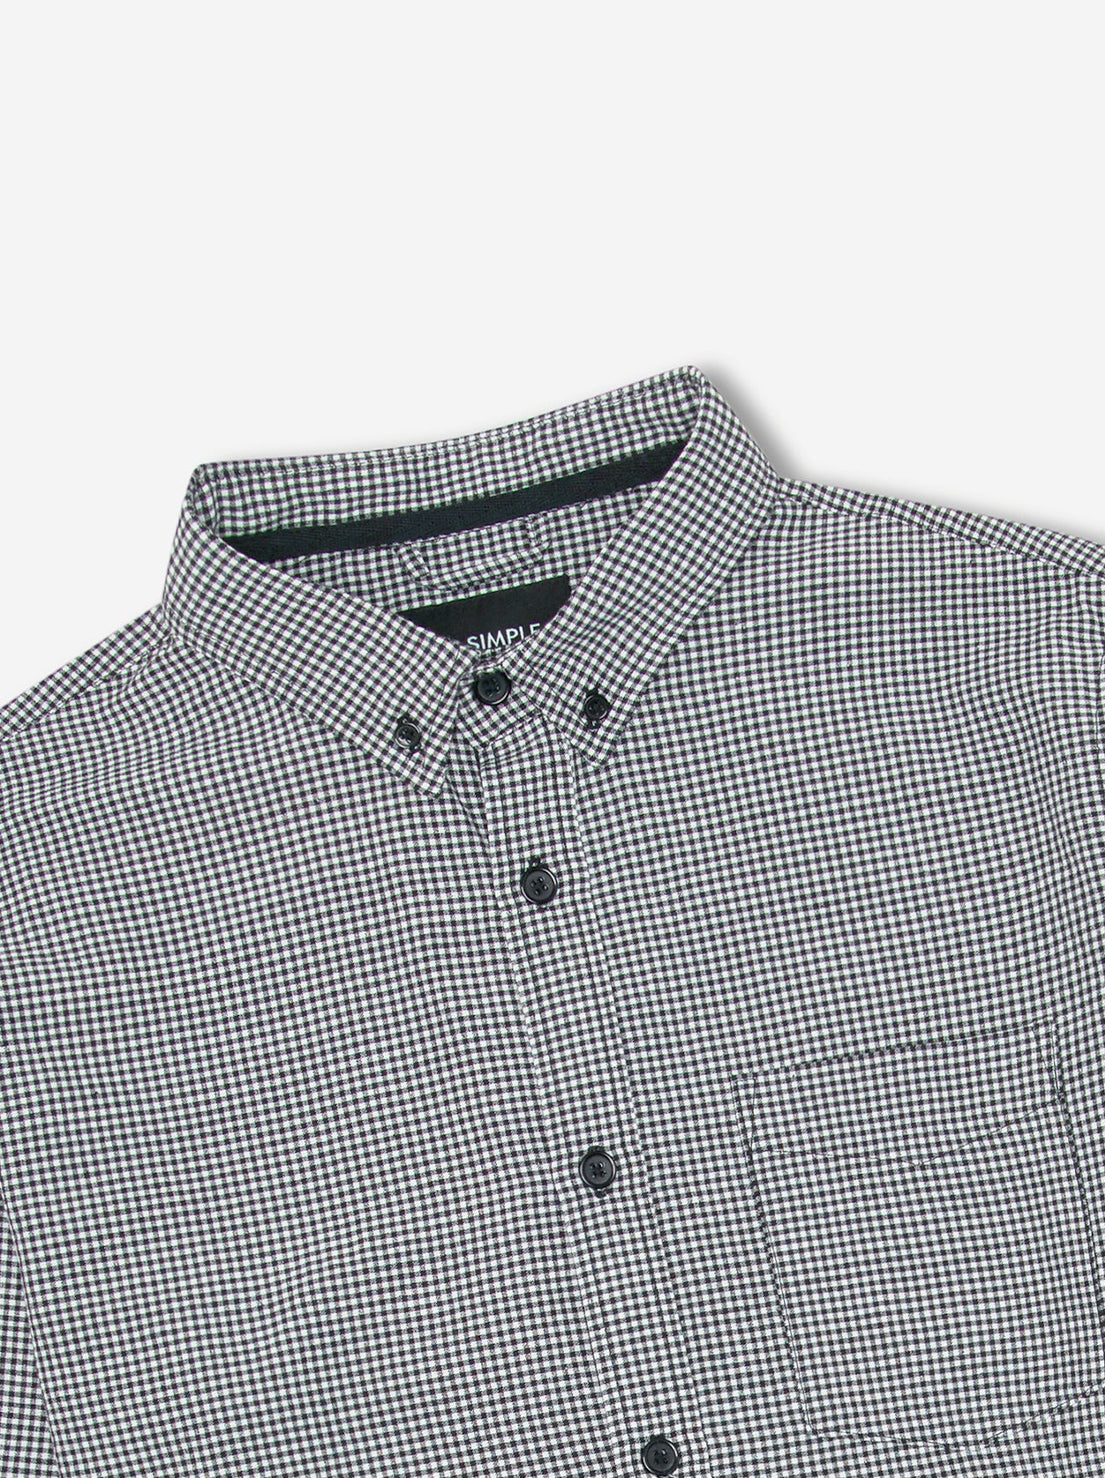 Mr Simple - Oxford Check Long Sleeve Shirt - Navy Gingham